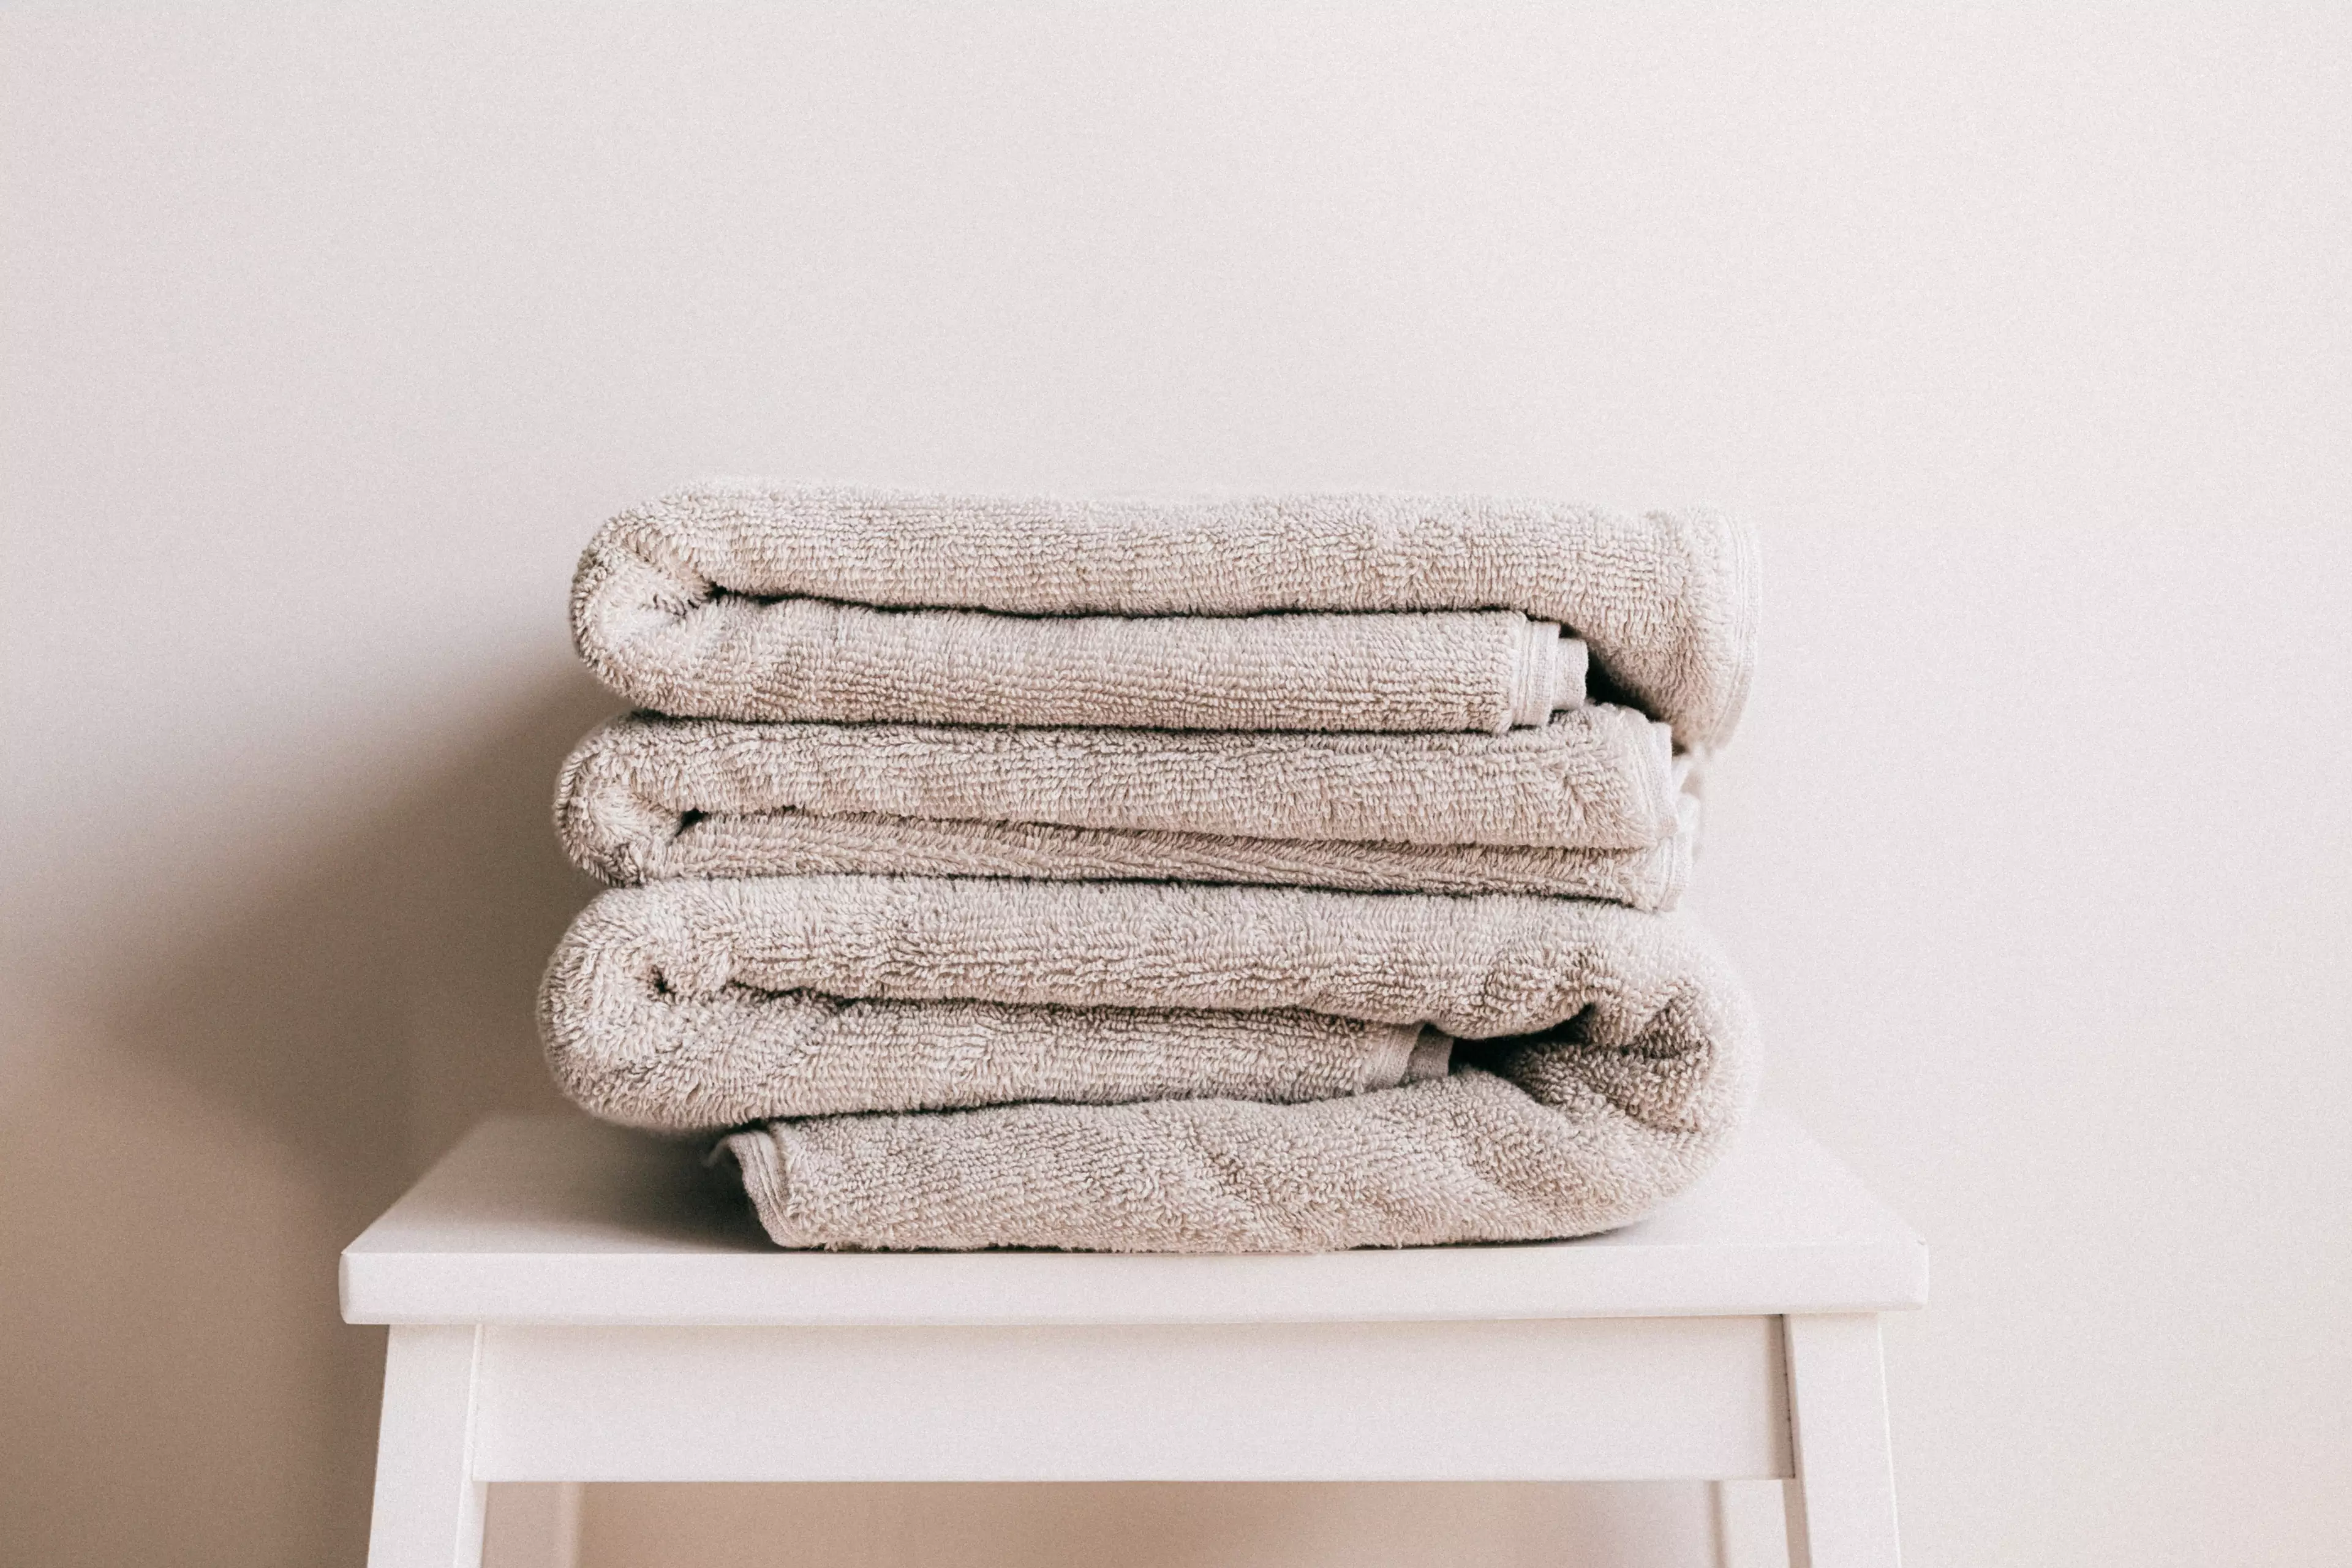 Washing your towels once or twice a week is optimum (